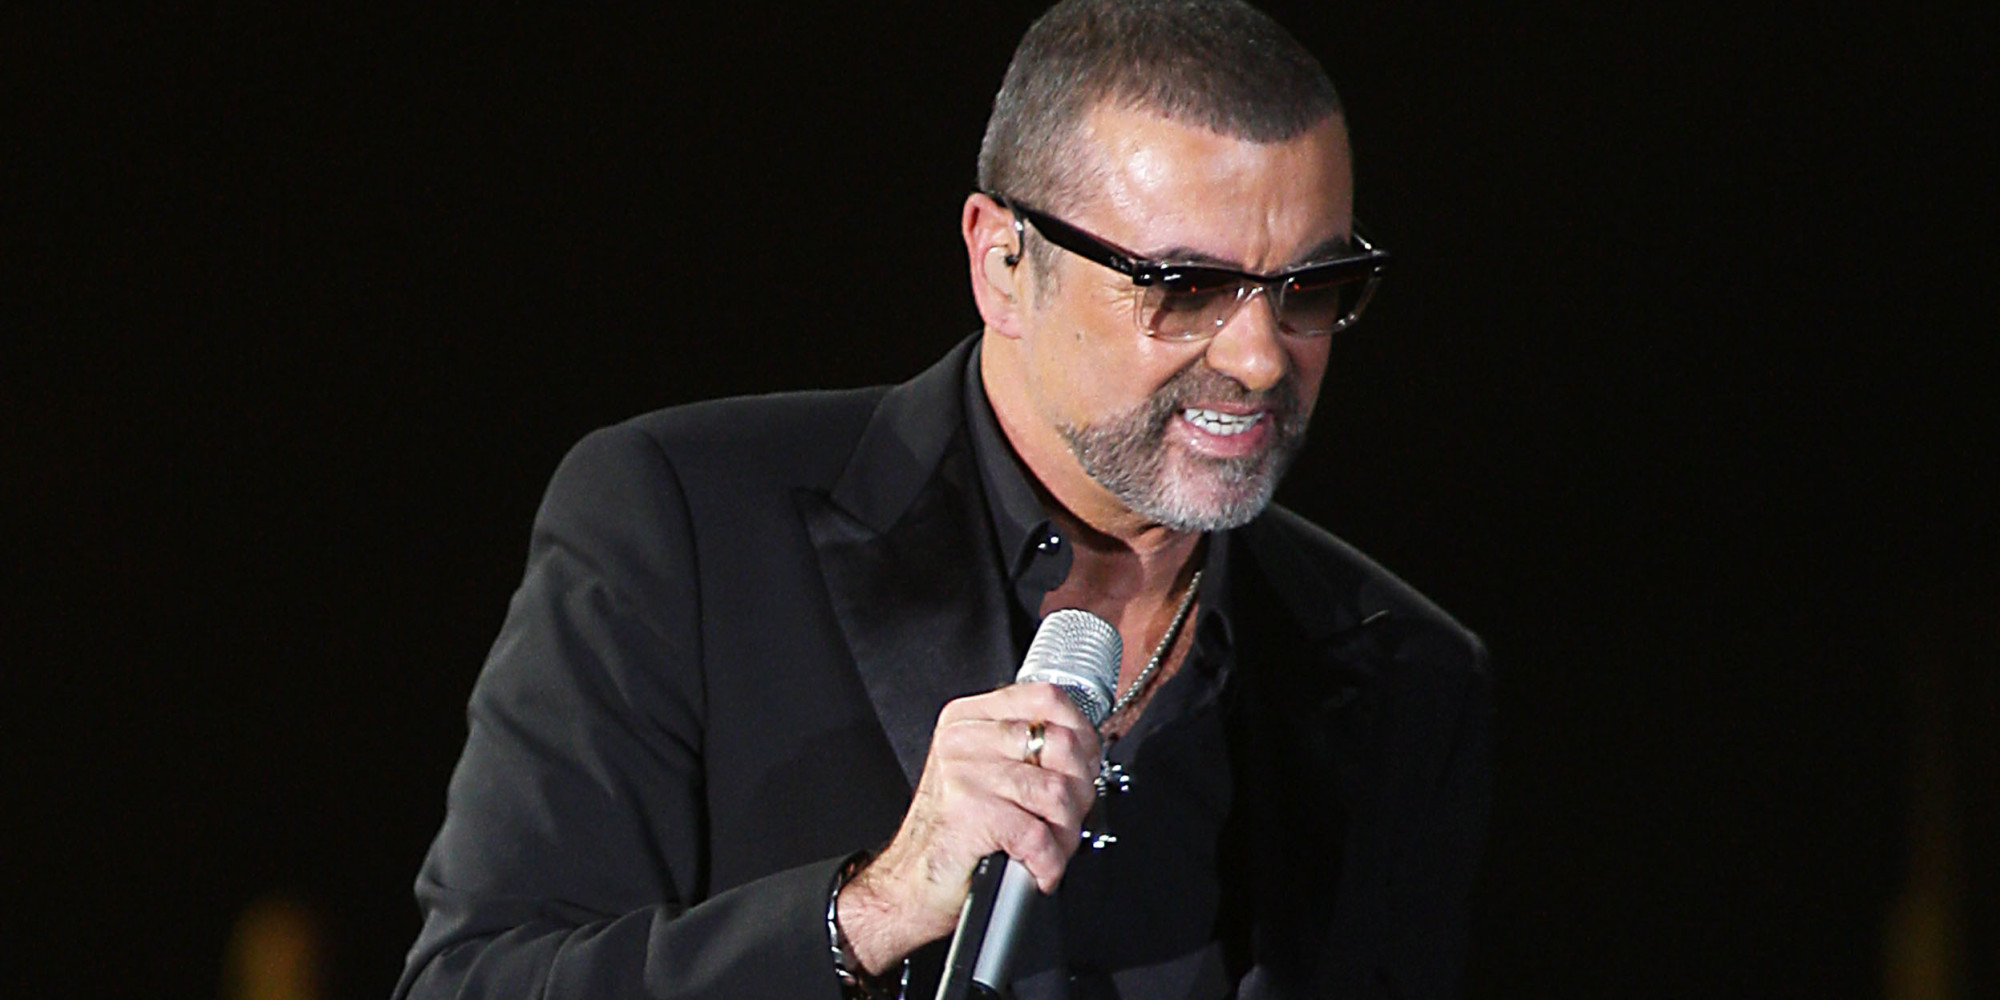 George Michael Denies 39;Crack Cocaine39; Allegations From 39;Distant 